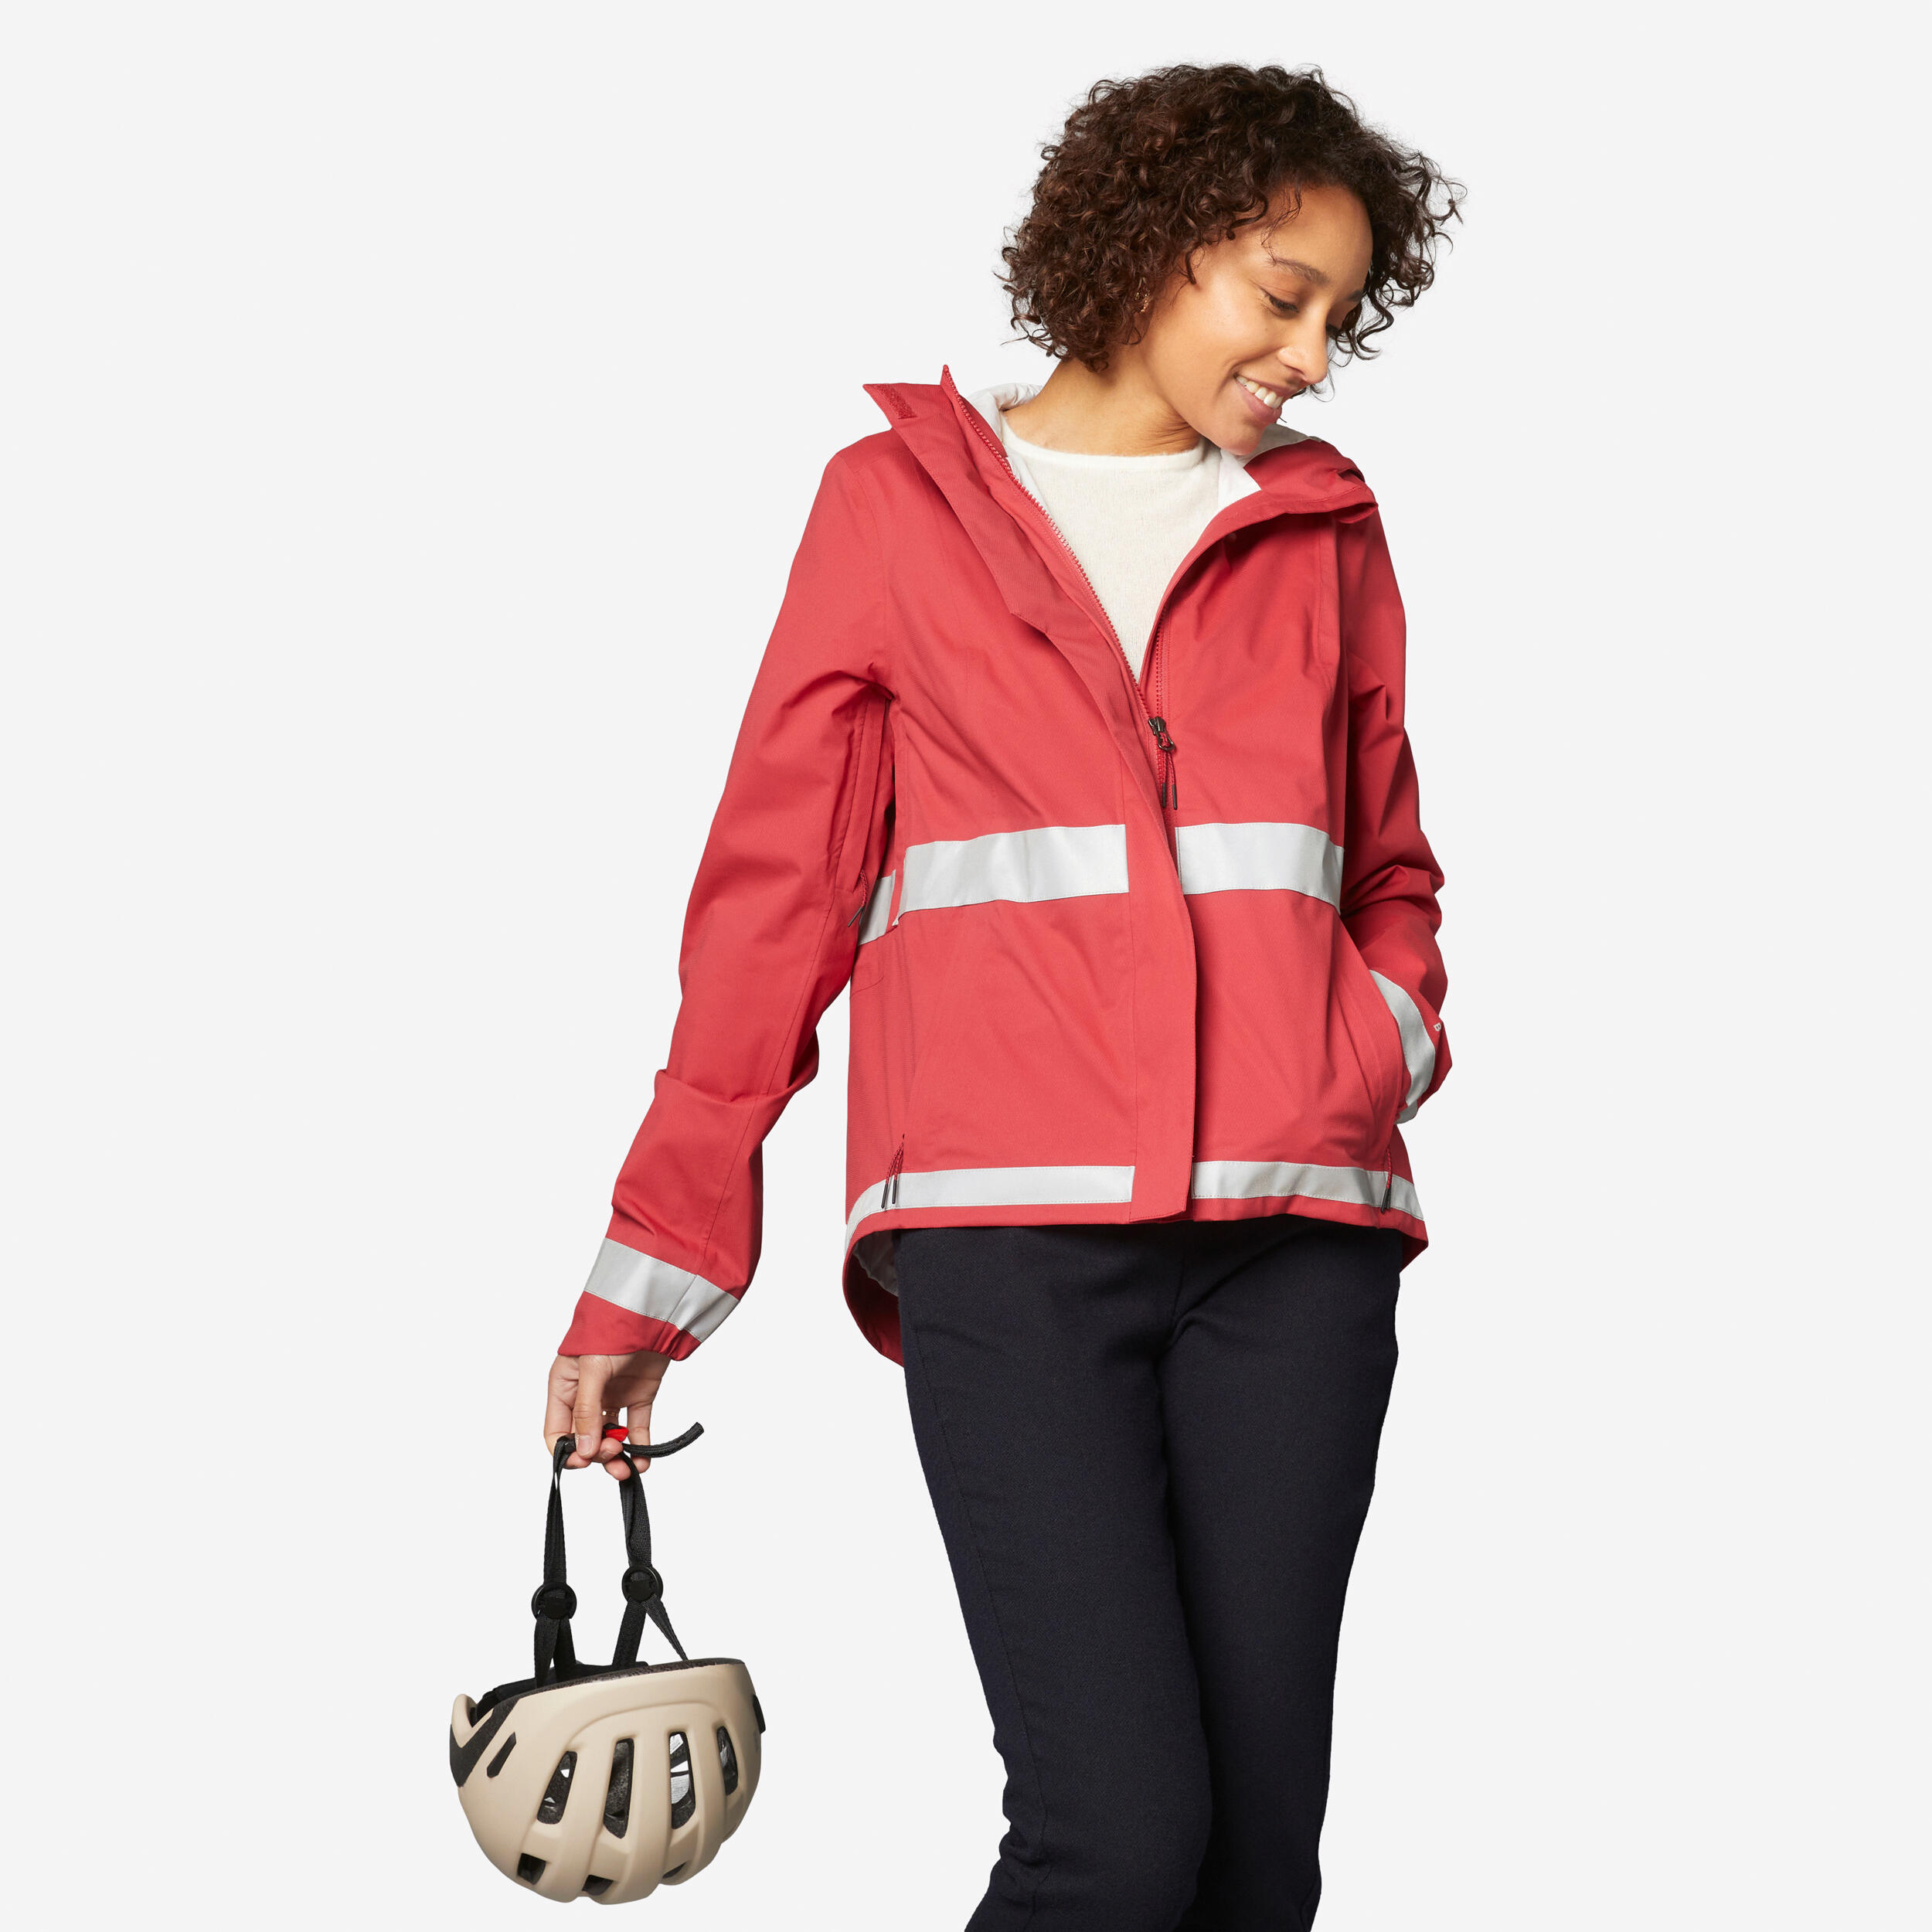 BTWIN Women's City Cycling Night Visibility Rain Jacket 540 - Red